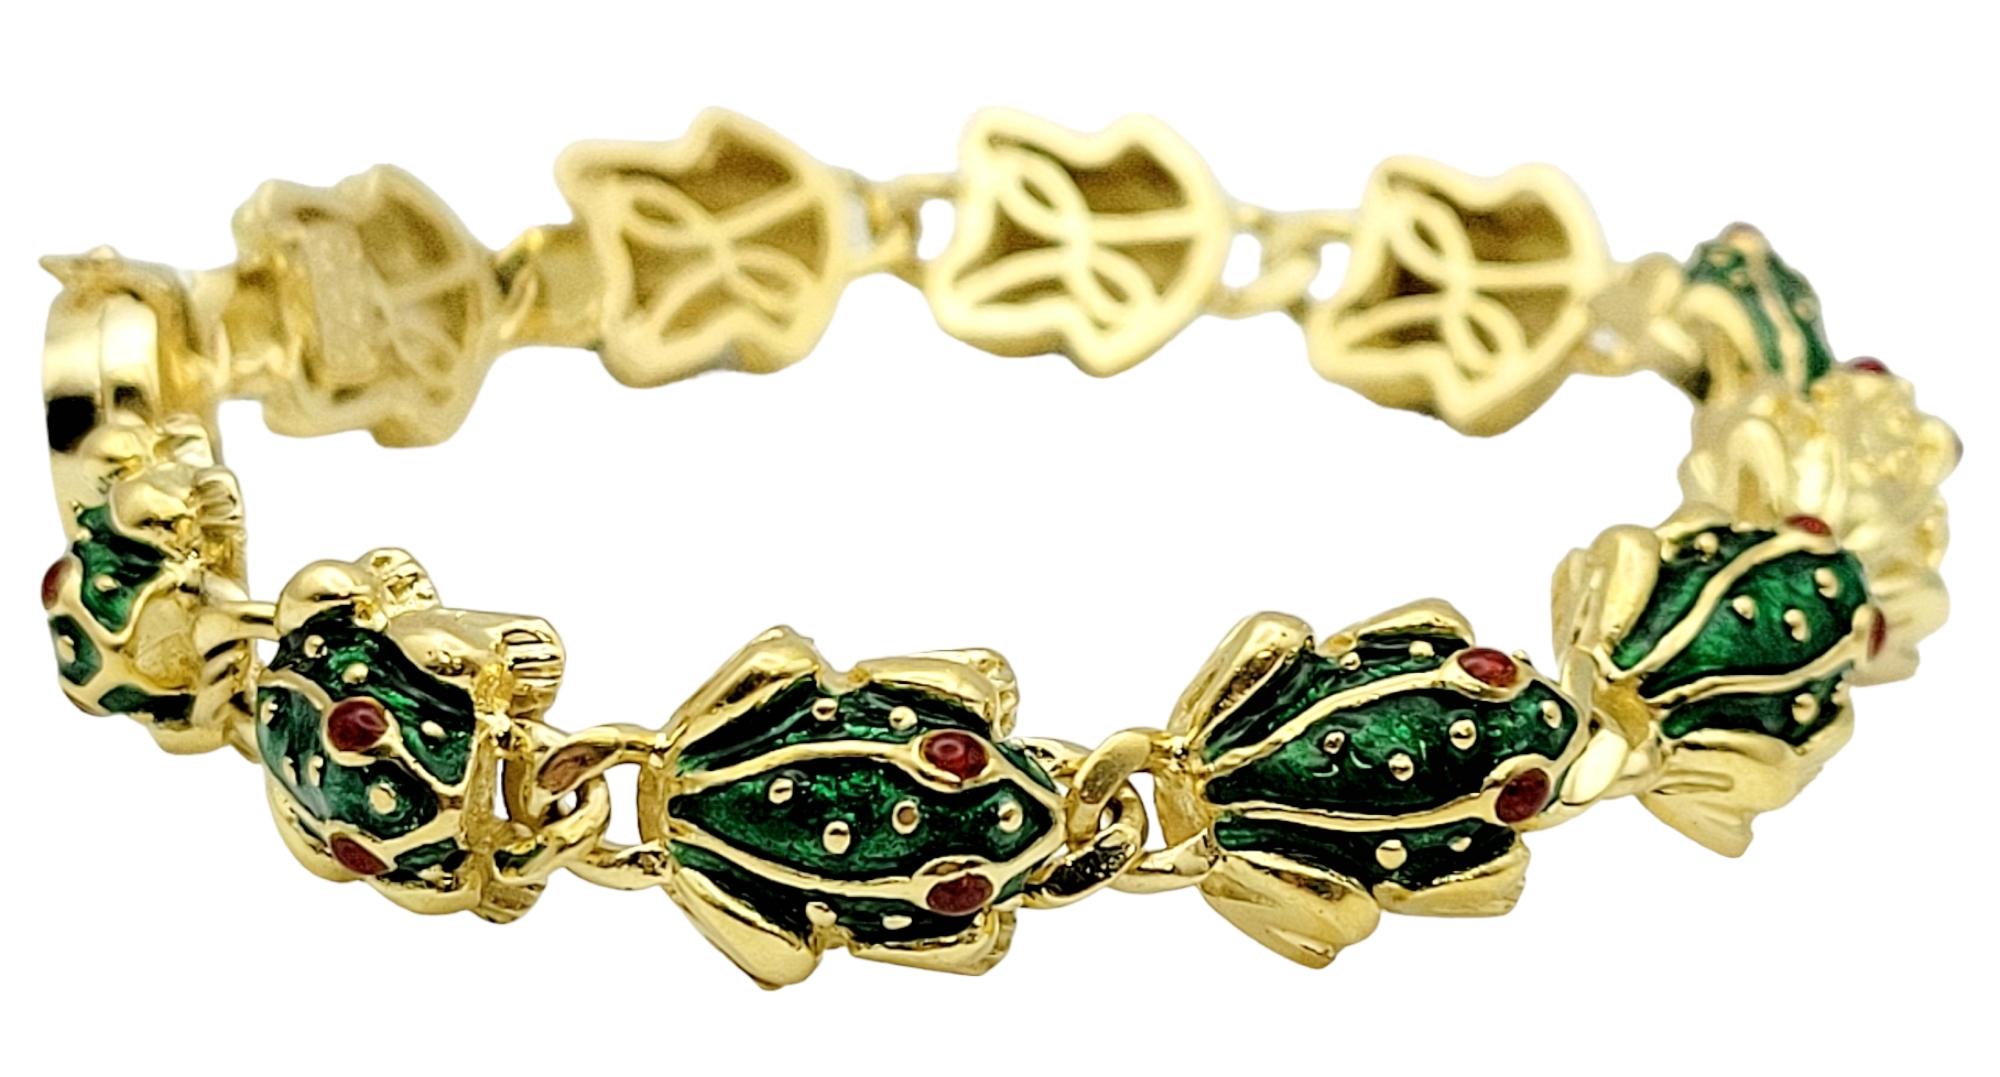 This incredible, modern gold frog link bracelet is an authentic Hidalgo design! The beautiful bracelet features detailed 3-D frog links with green and red enamel accents. There are 11 frog links, 10 of which feature a green enamel body with red